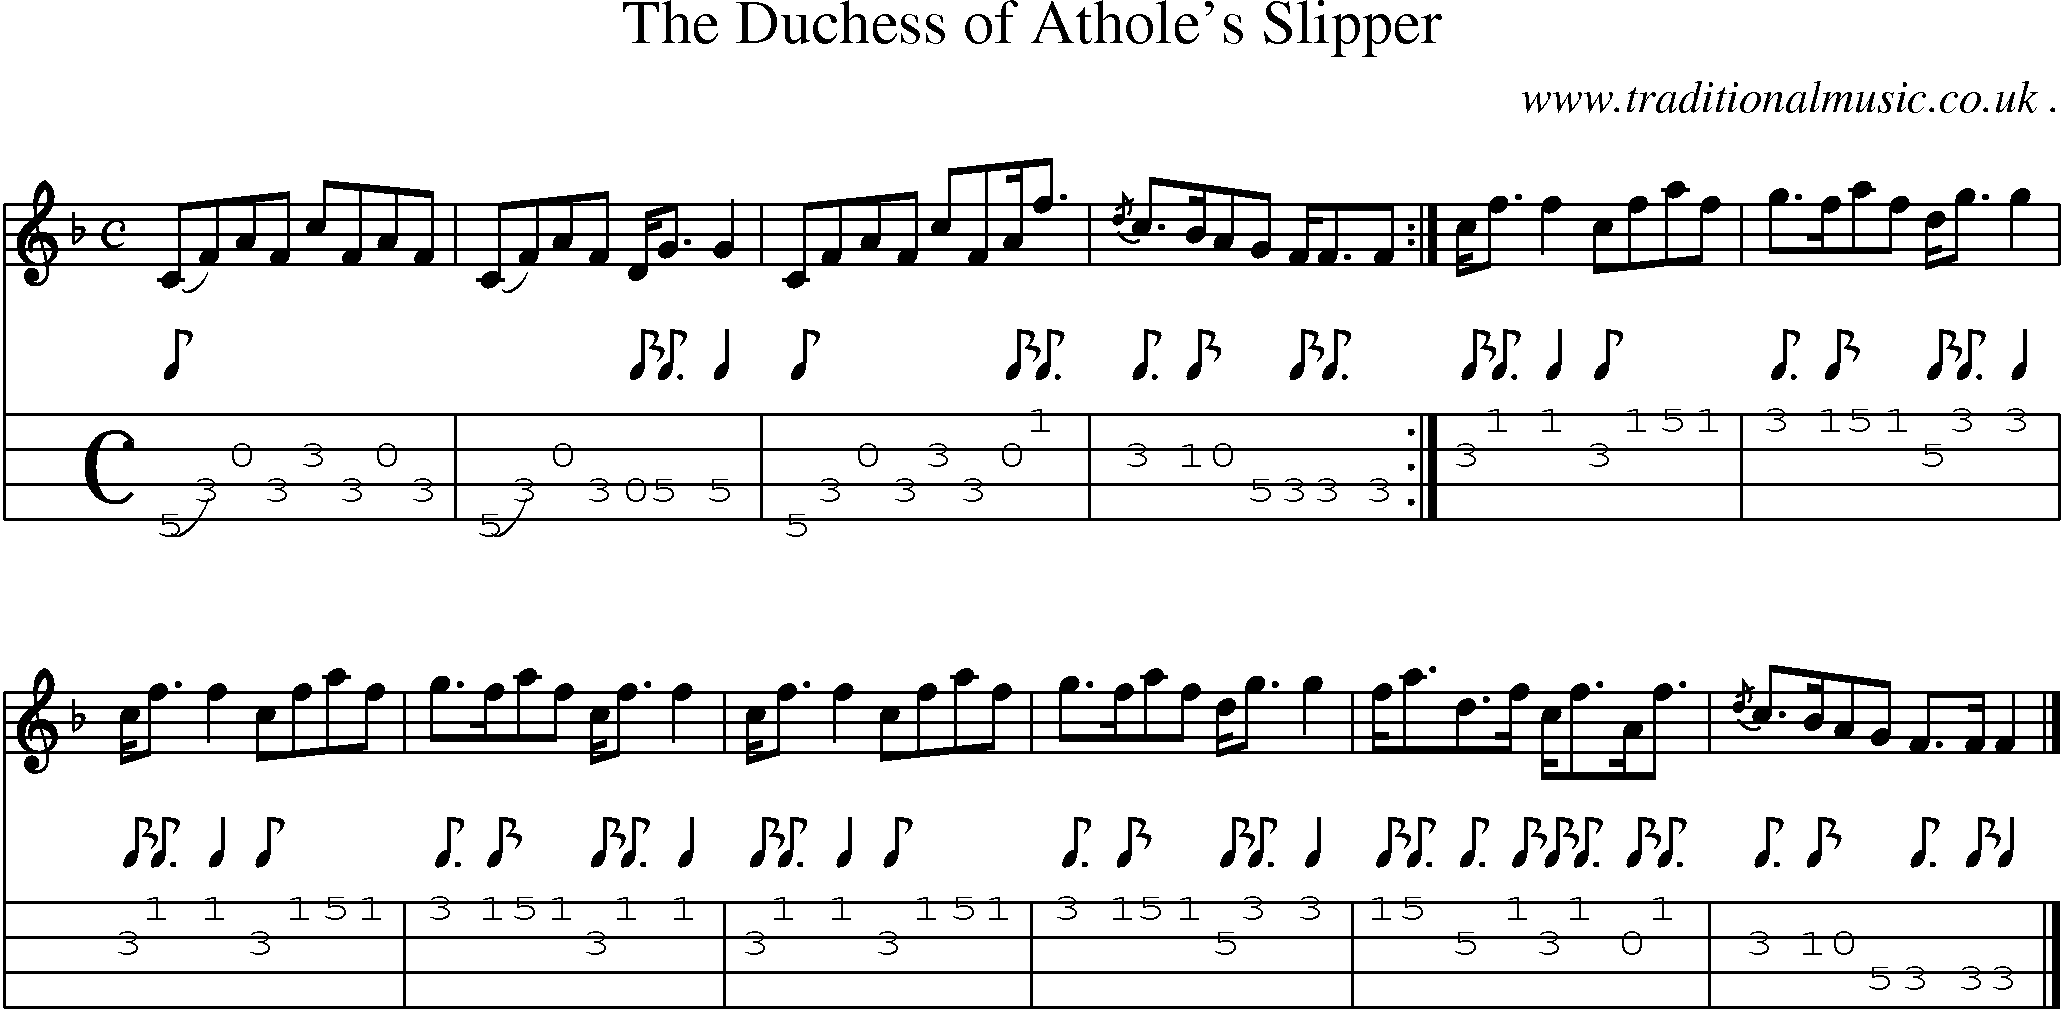 Sheet-music  score, Chords and Mandolin Tabs for The Duchess Of Atholes Slipper